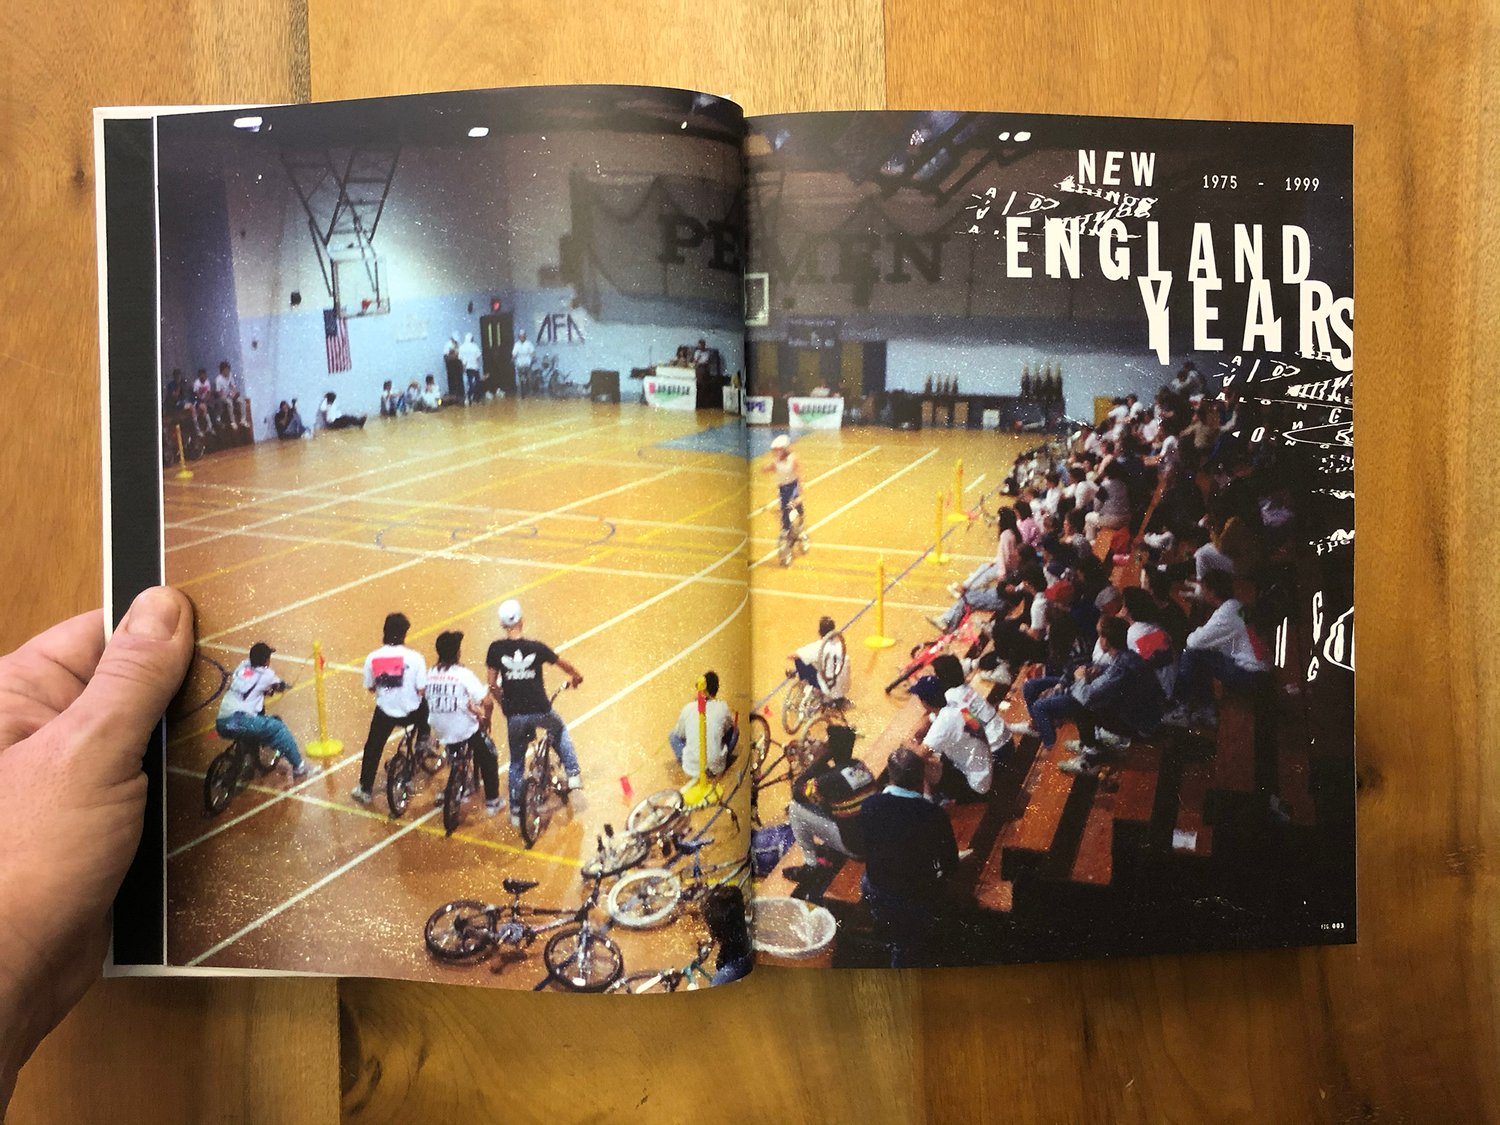 Image of Things Seen Along the Way: BMX Freestyle 1994-2014 — Hardcover Book